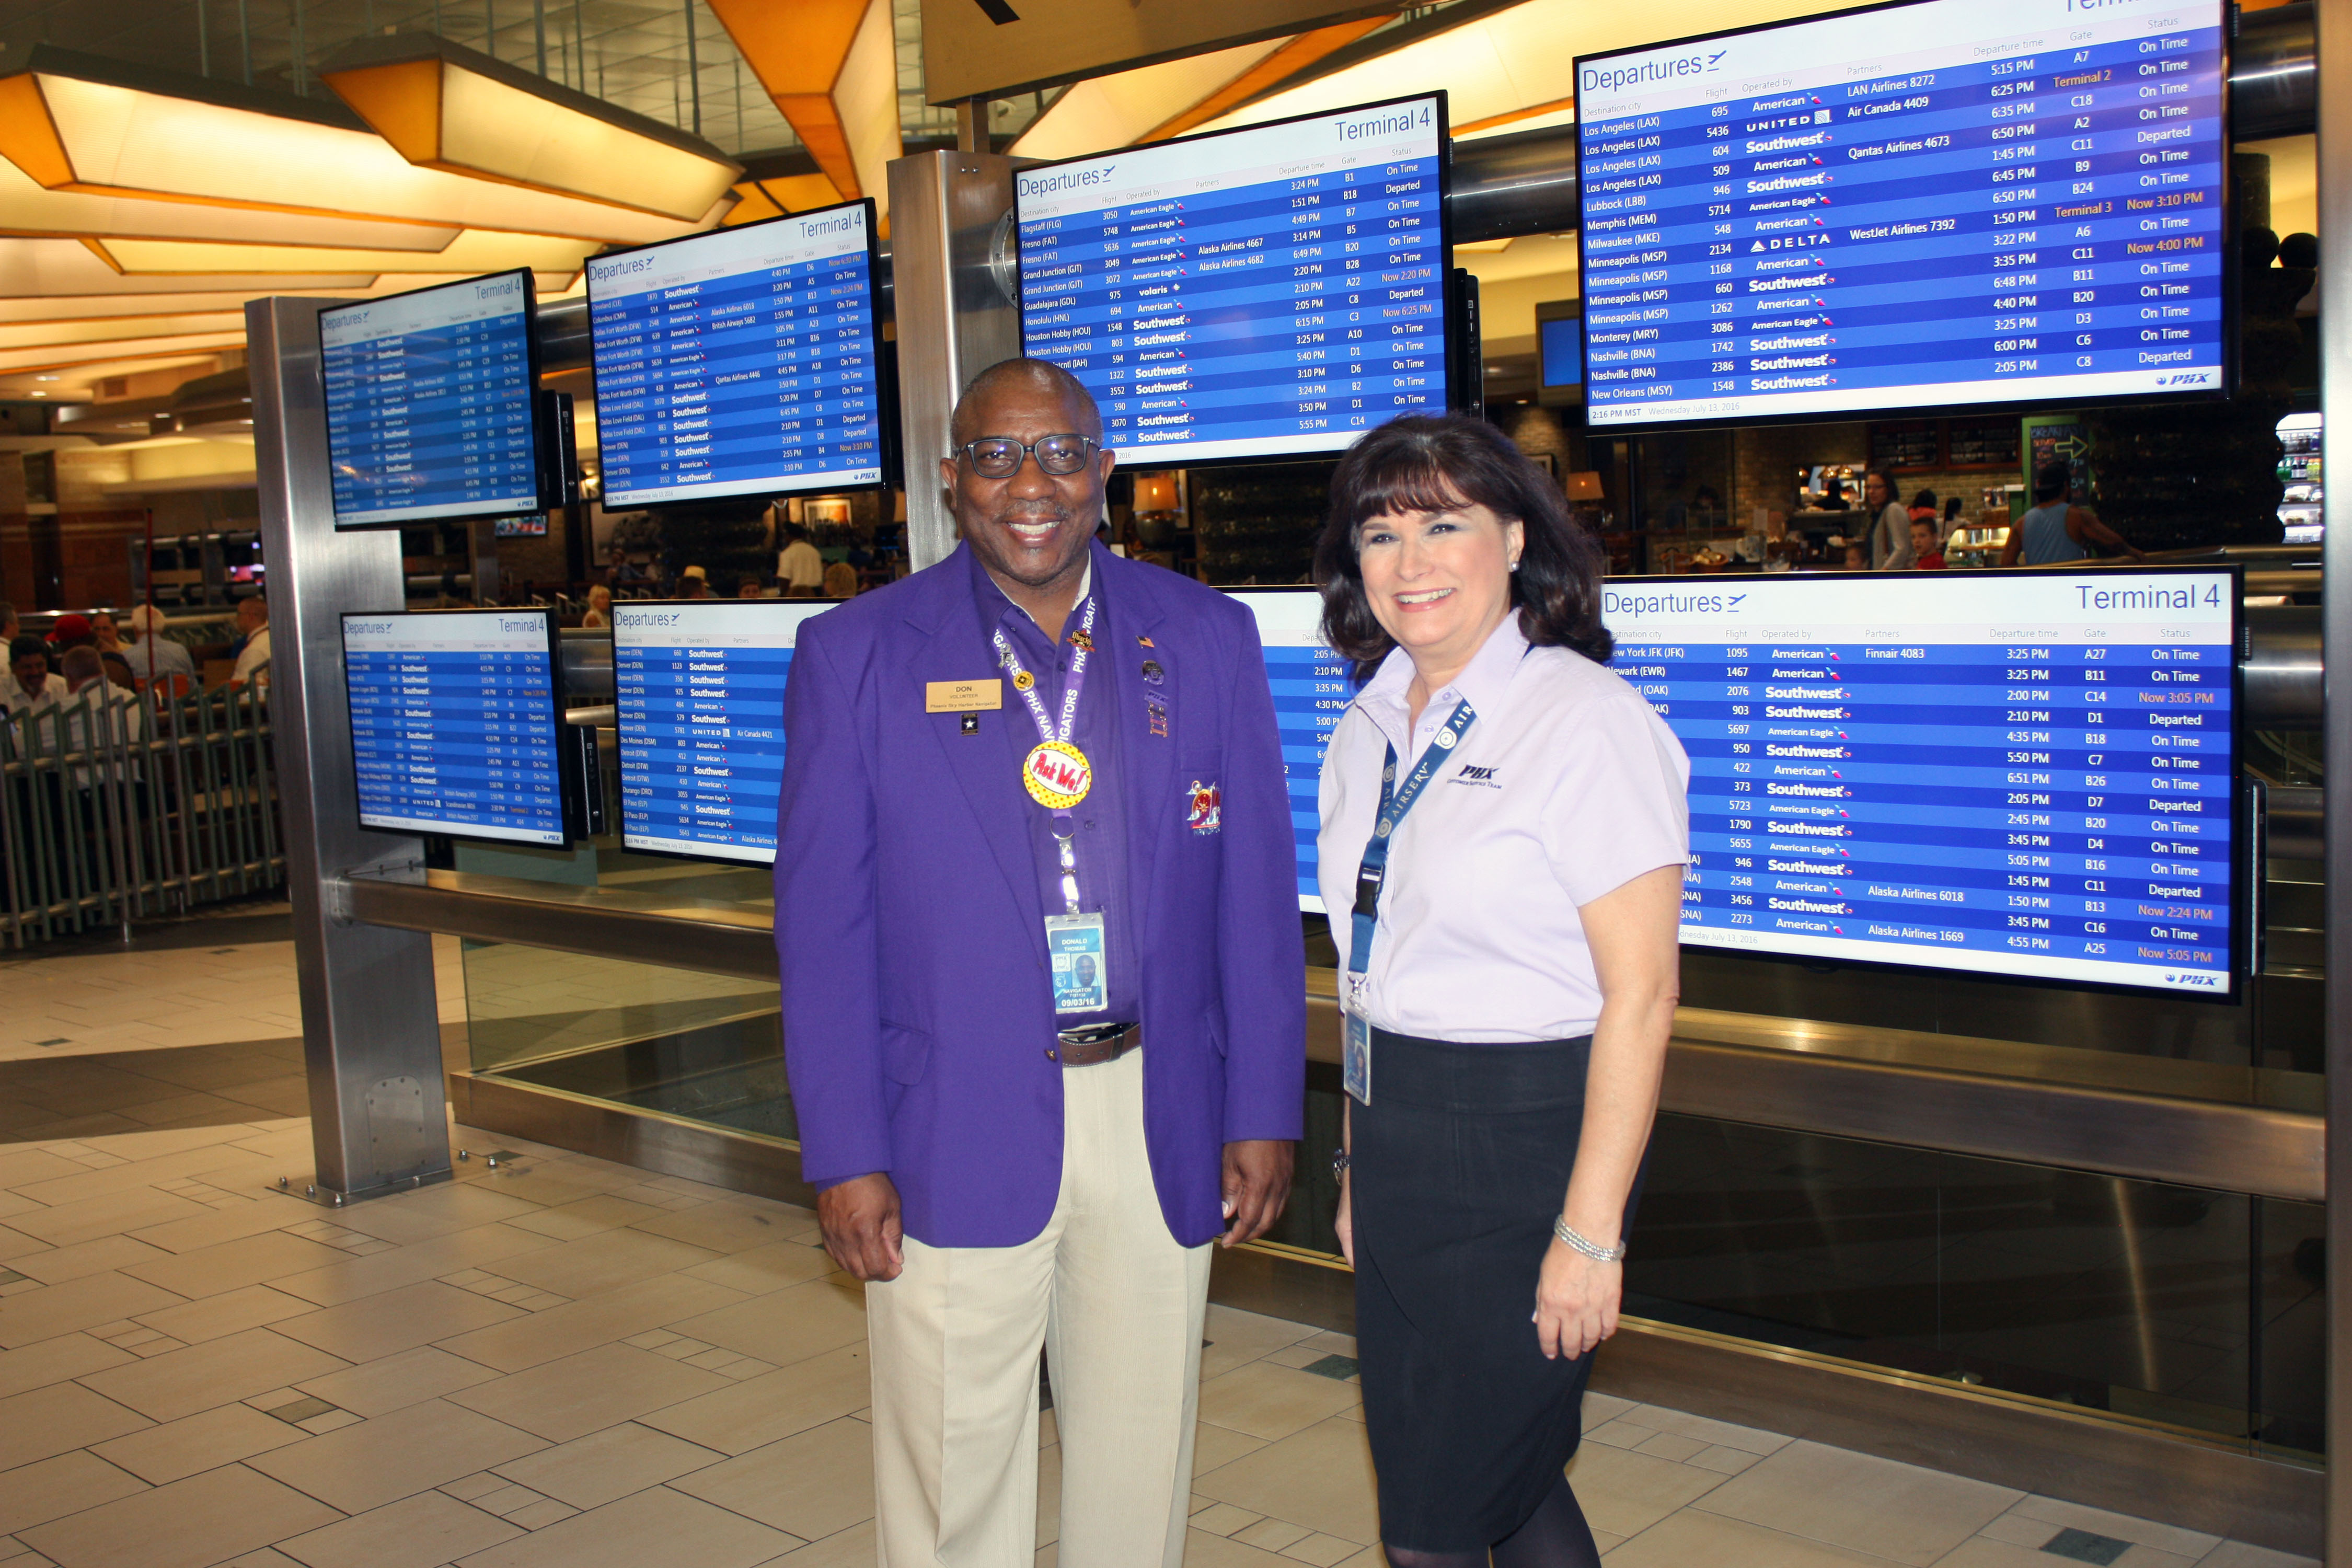 Two Airport Attendants